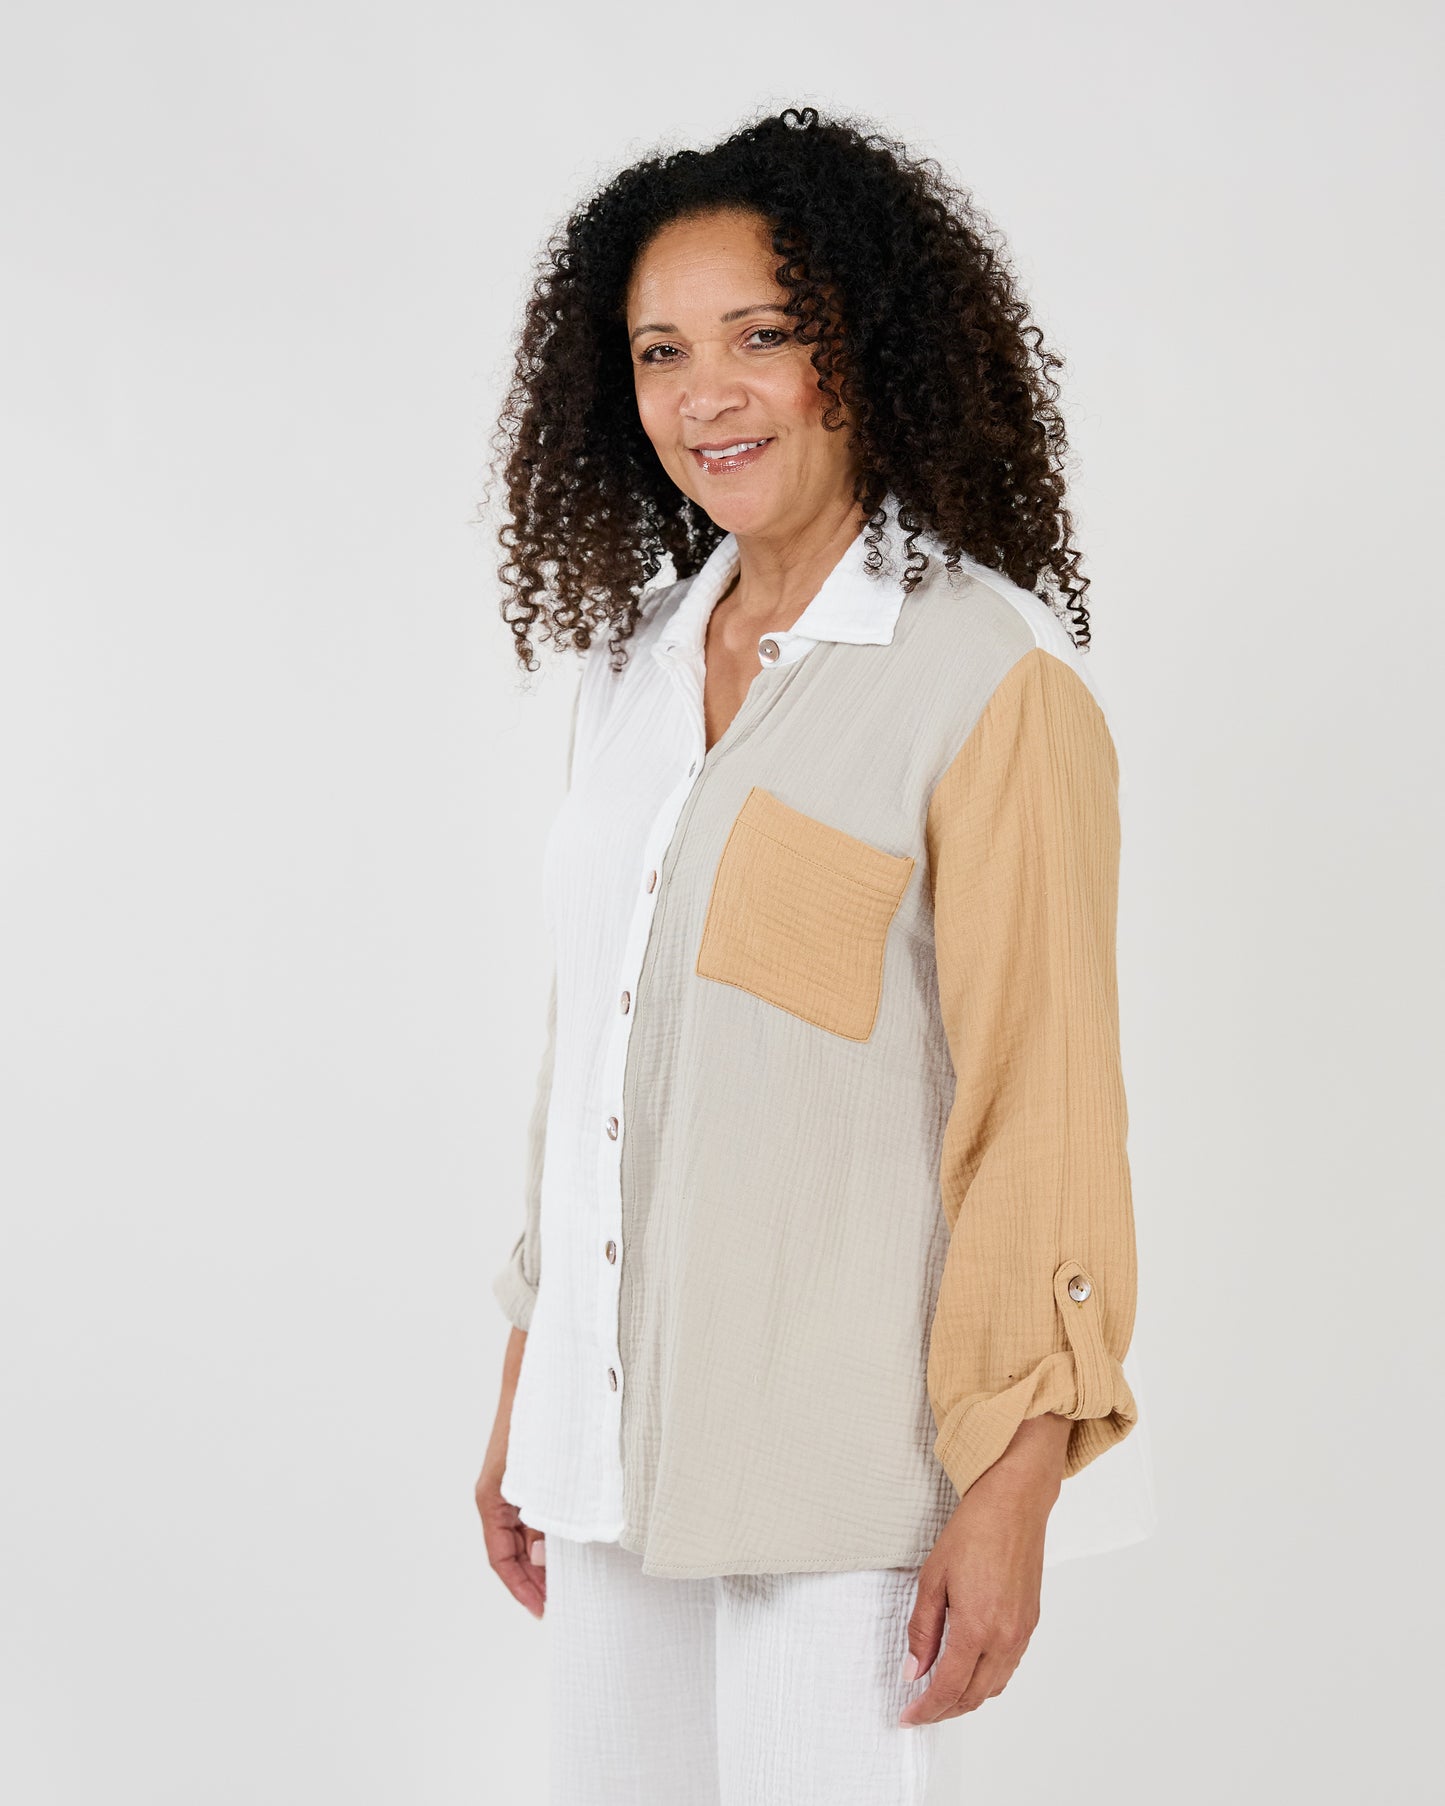 A woman with curly hair smiling, wearing a Shannon Passero Malani Button Up Shirt and white pants against a light background.